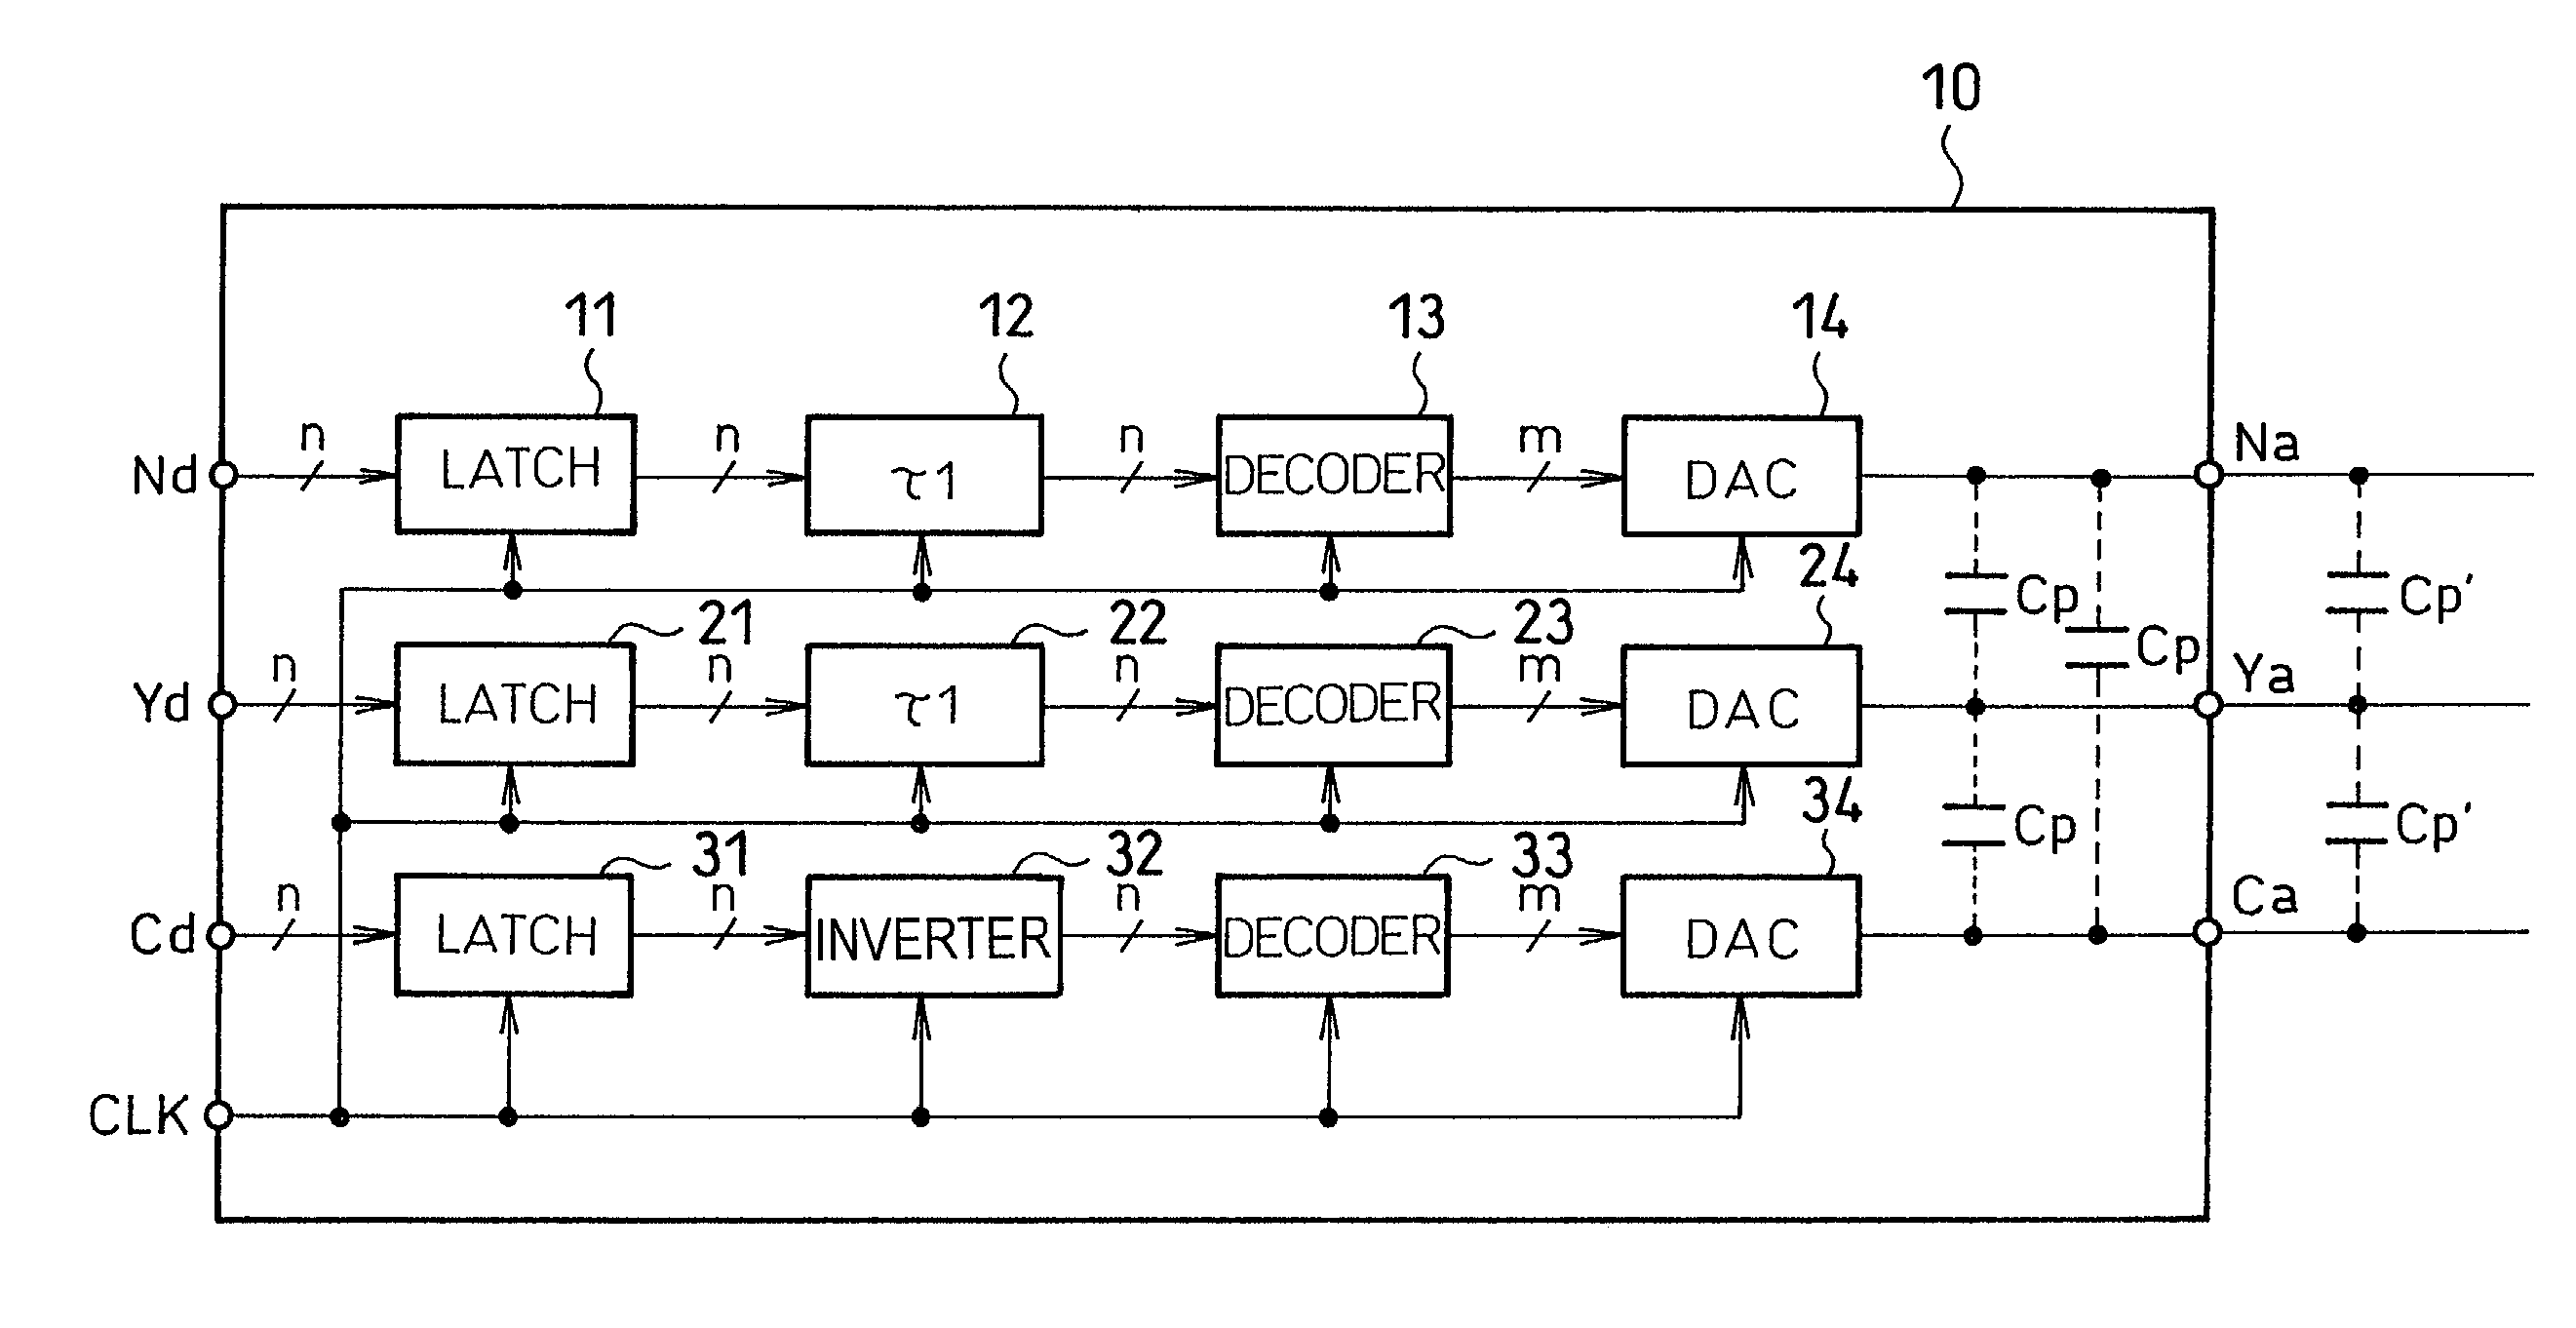 Semiconductor device having DAC channels for video signals